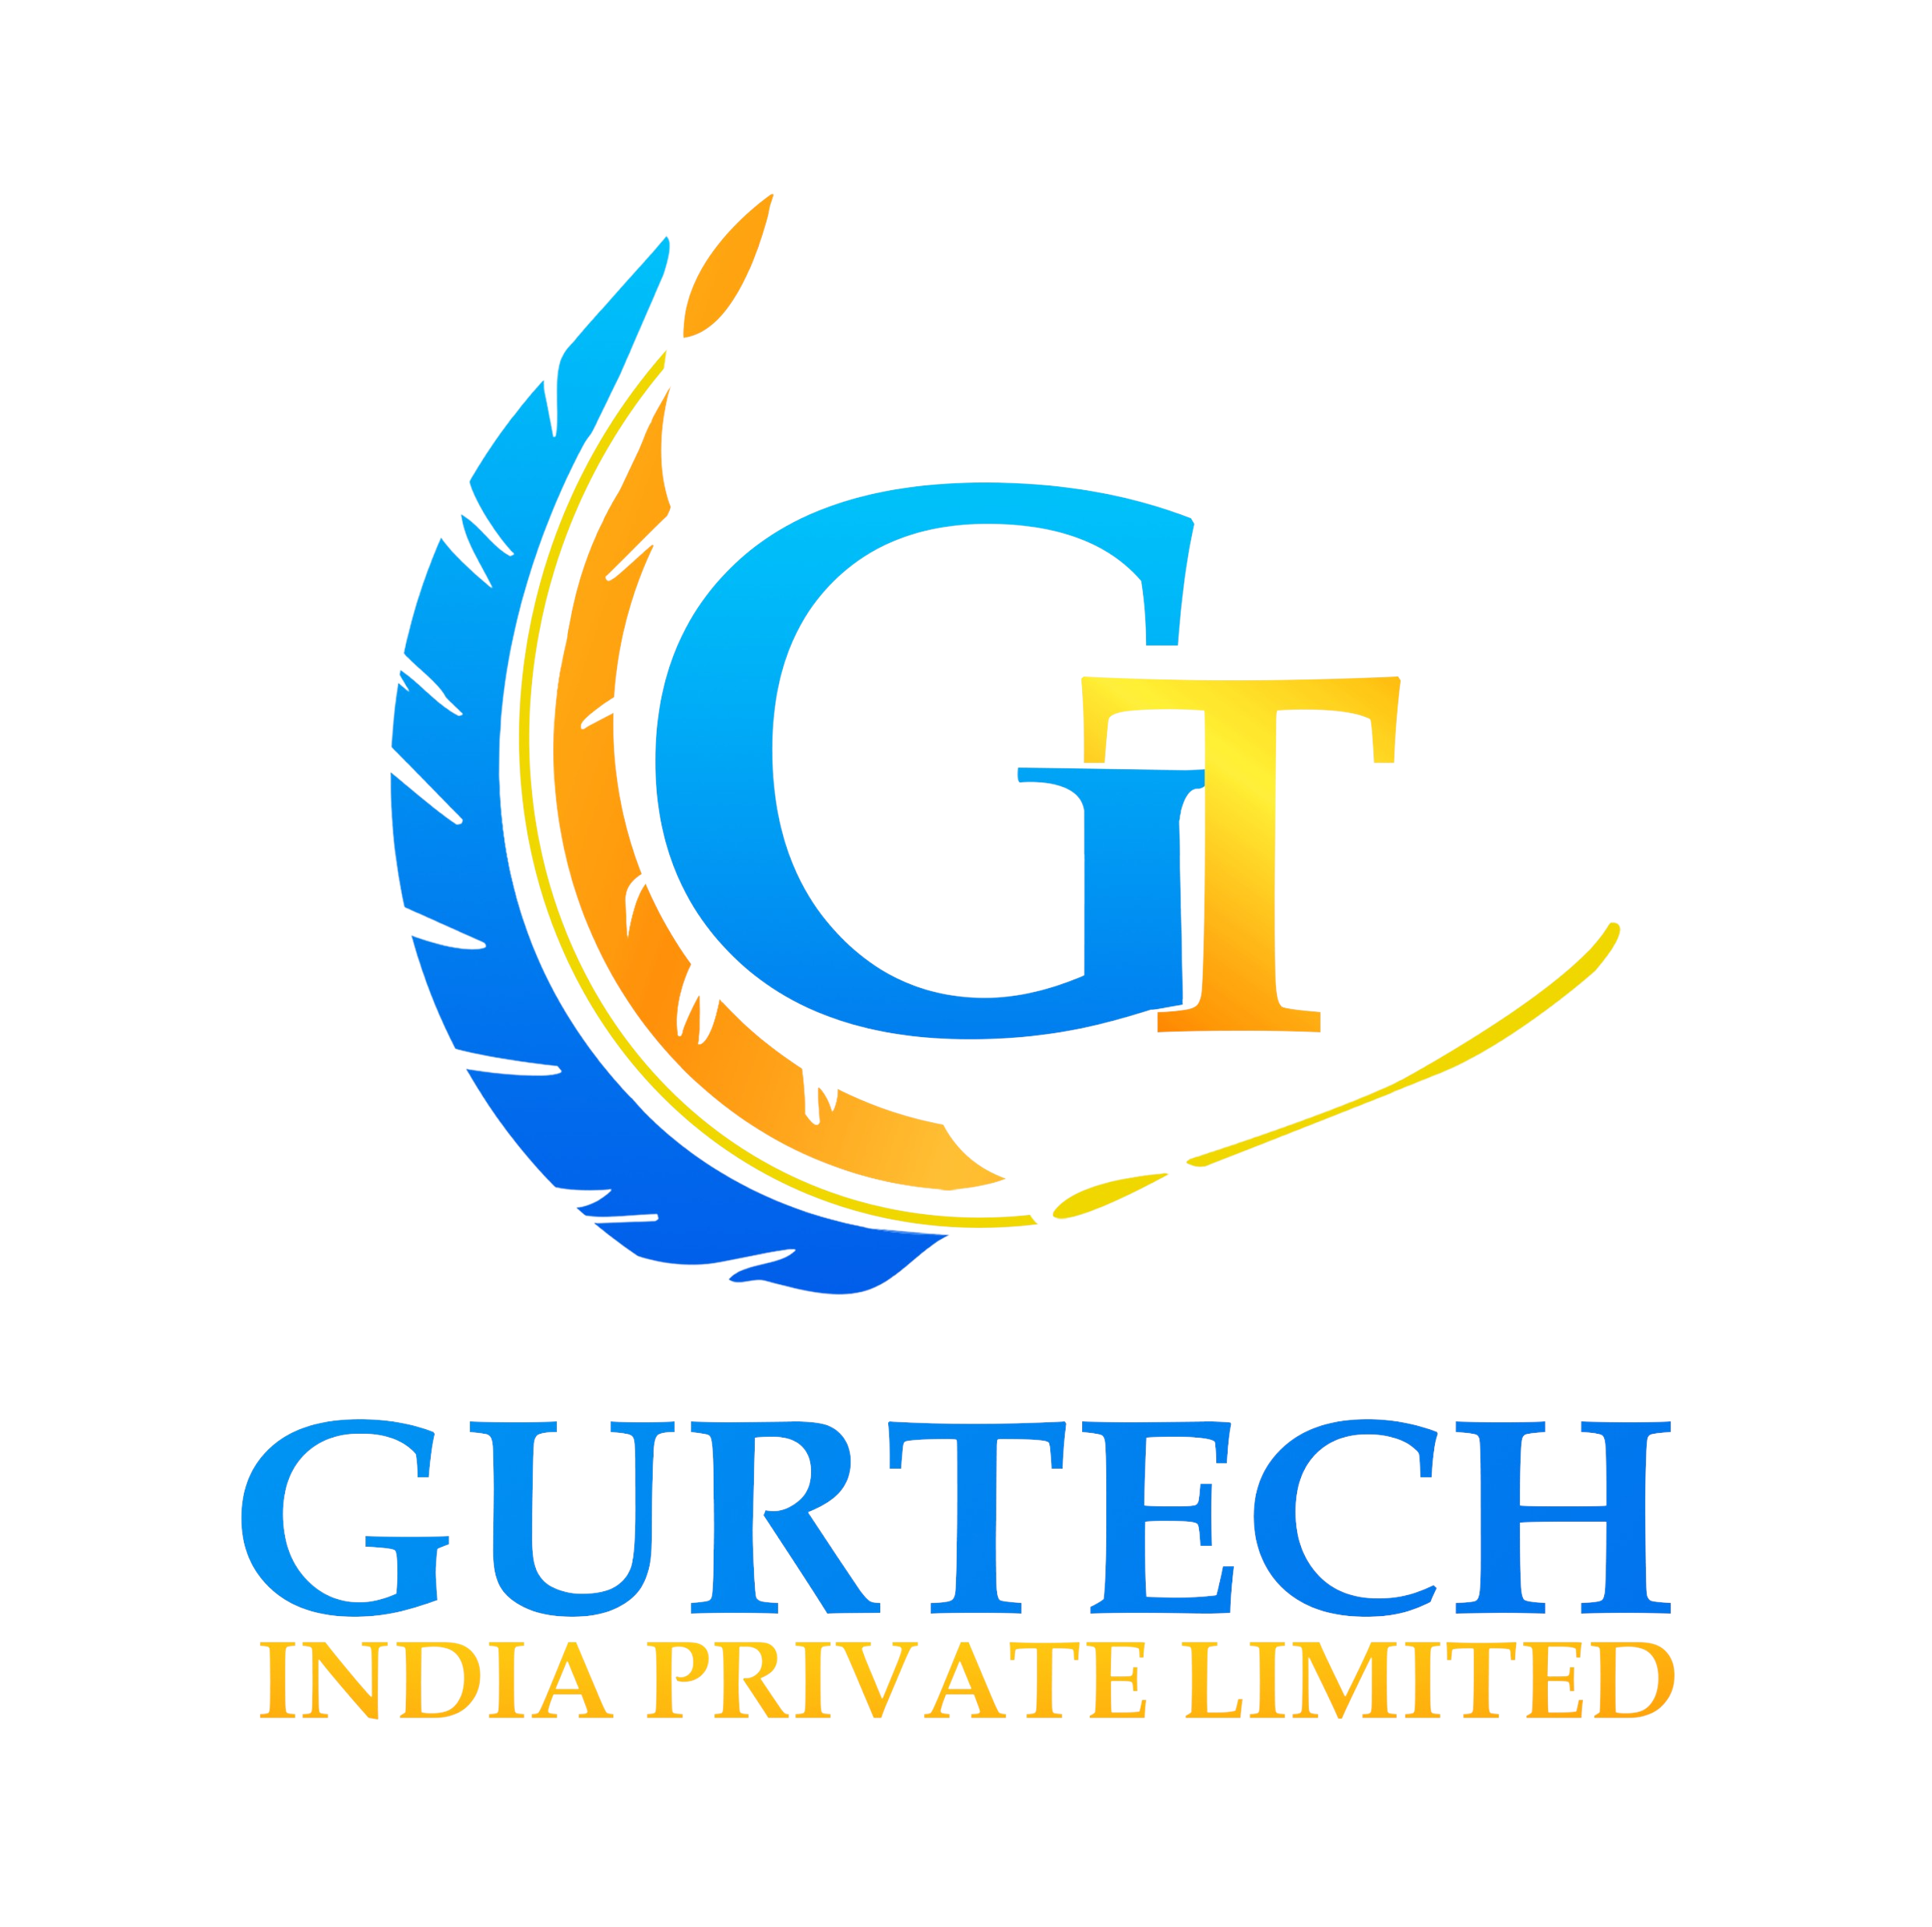 Gurtech India Private Limited